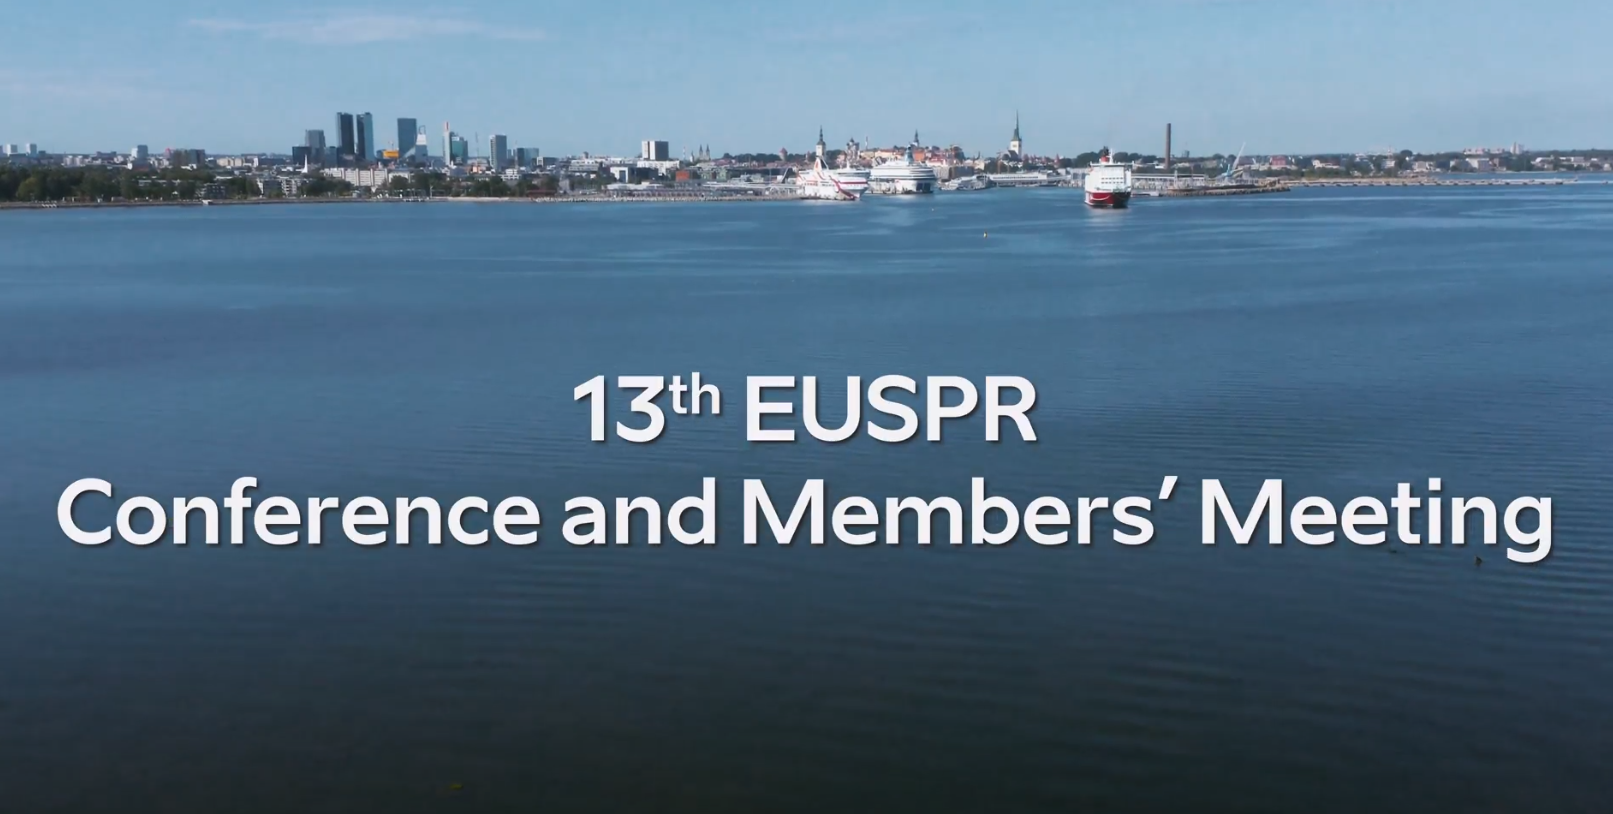 13th EUSPR Conference and Members’ Meeting